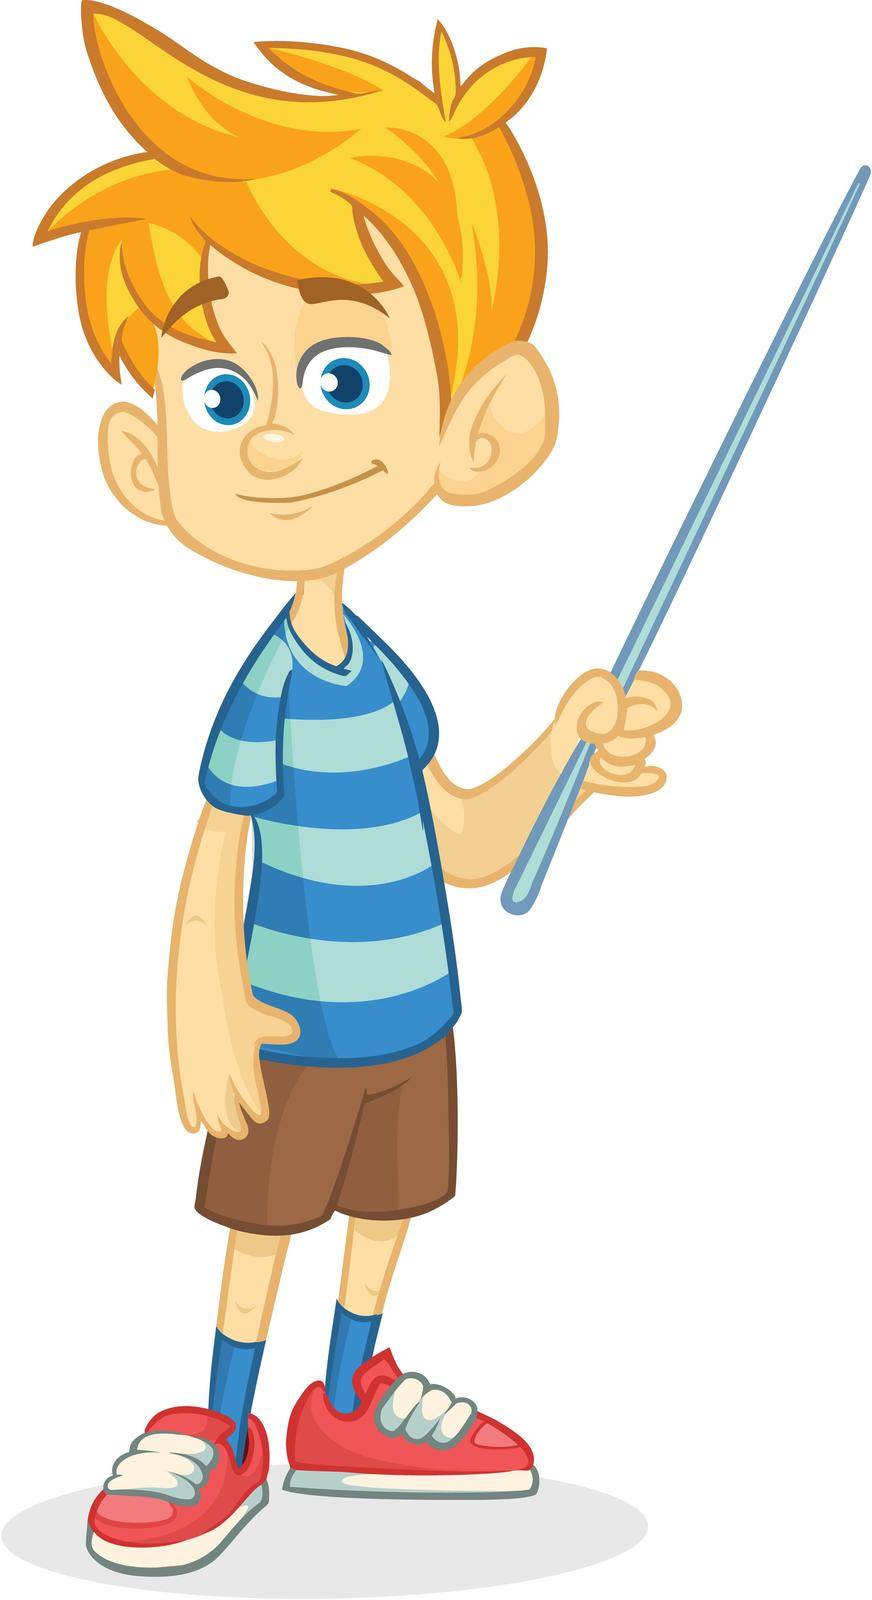 Cartoon little boy in shorts and striped t-shirt. Vector illustration of a funny make presentation with pointer